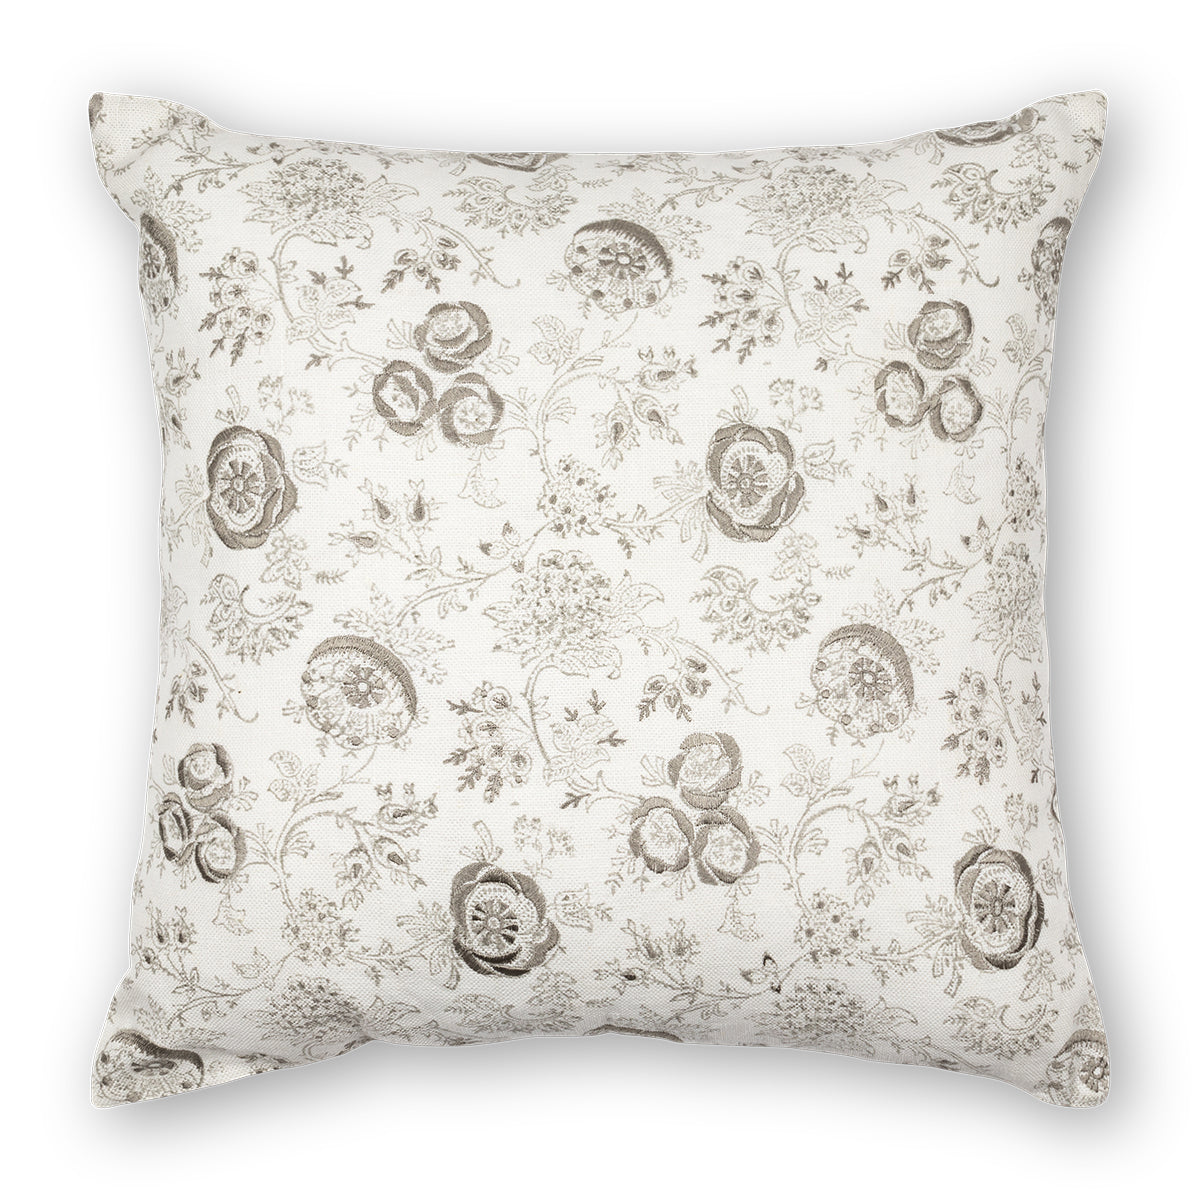 Eloquence Embroidered Pillow Cover